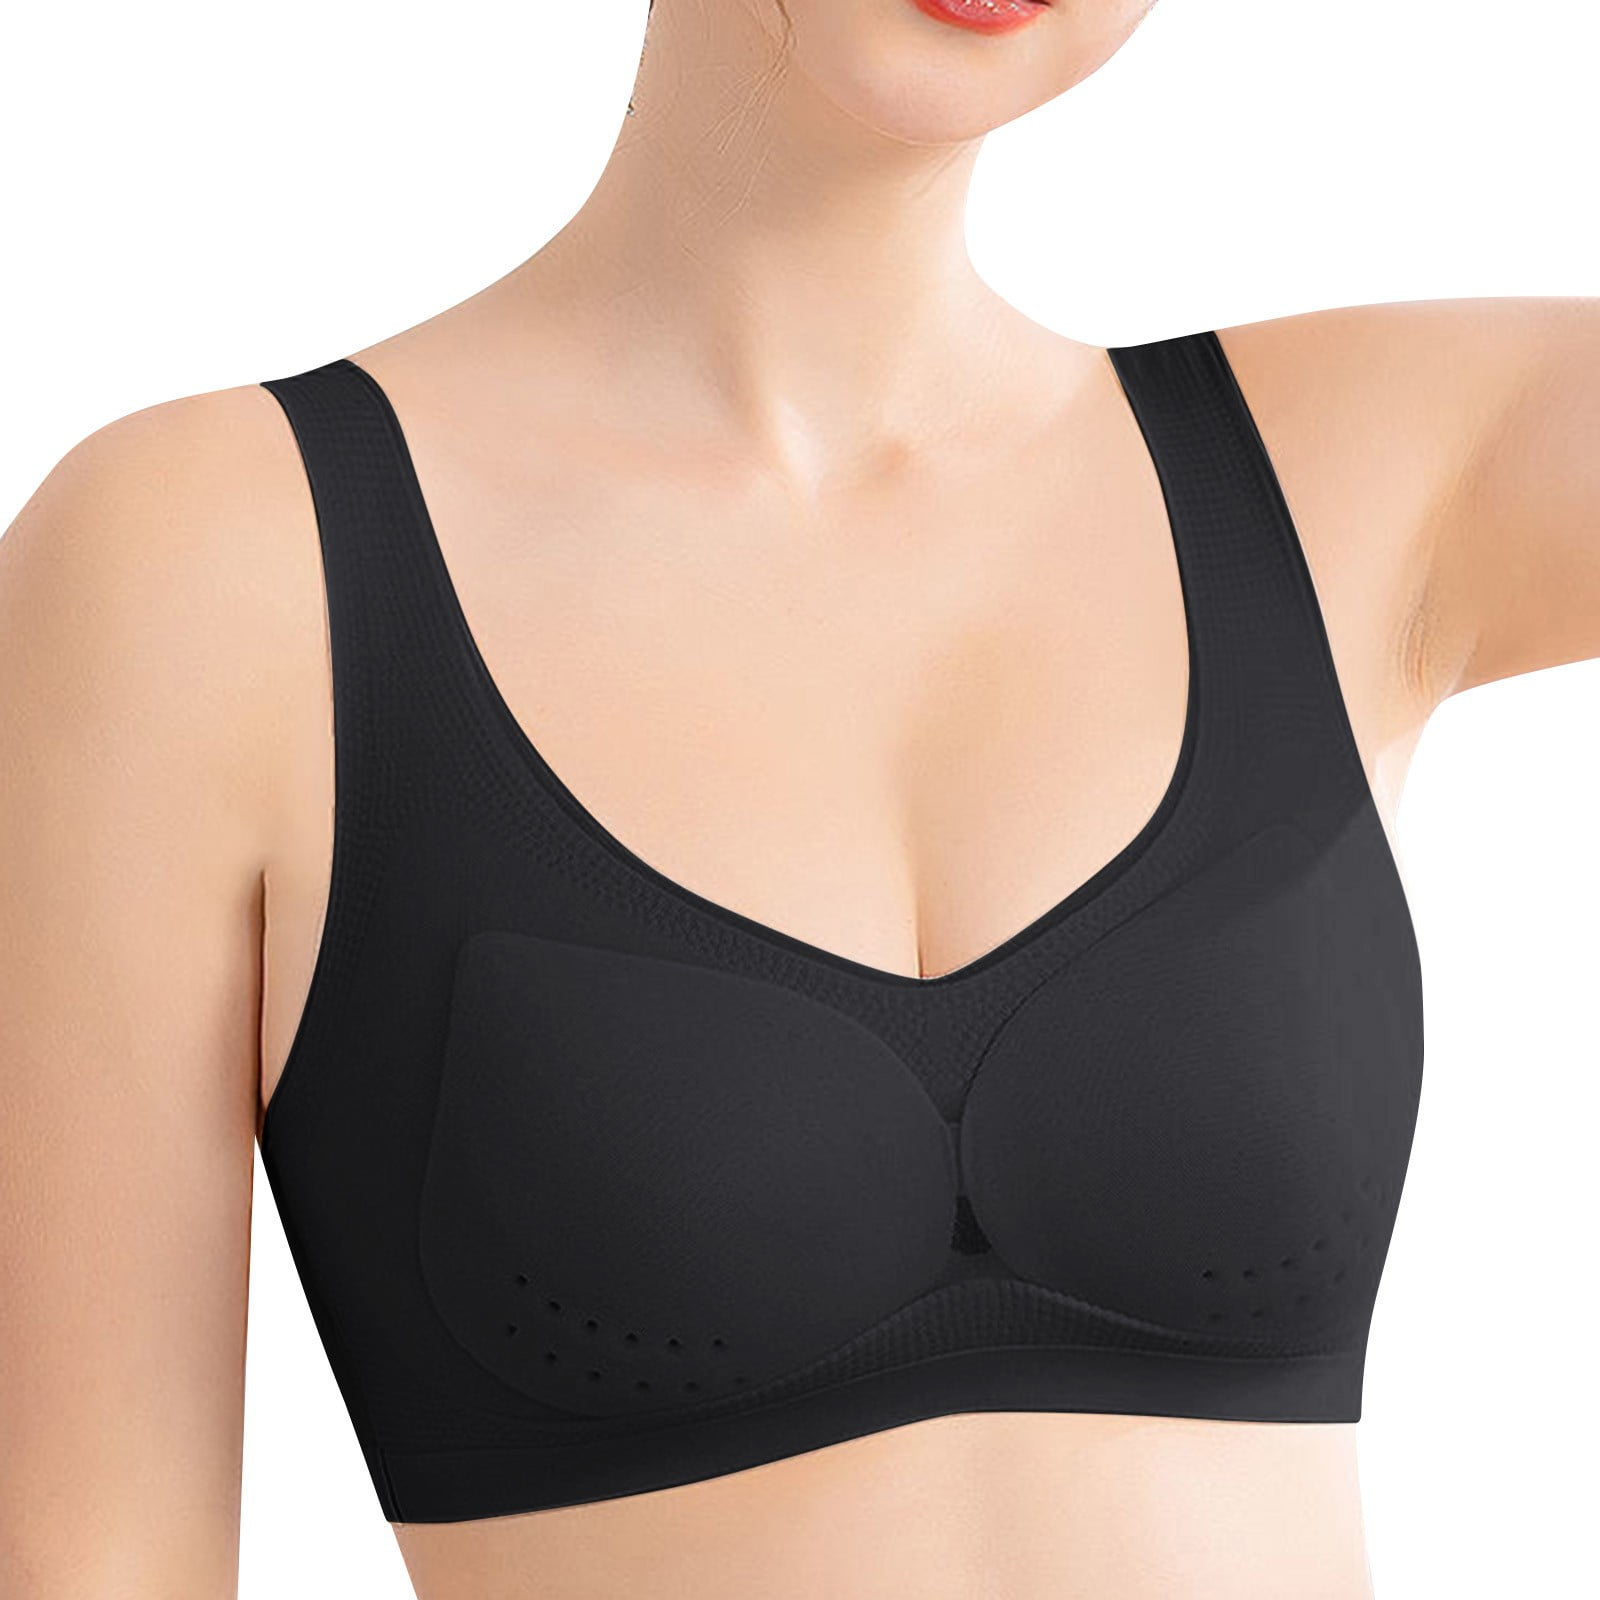 gvdentm Wirefree Bra with Support, Full-Coverage Wireless Bra for